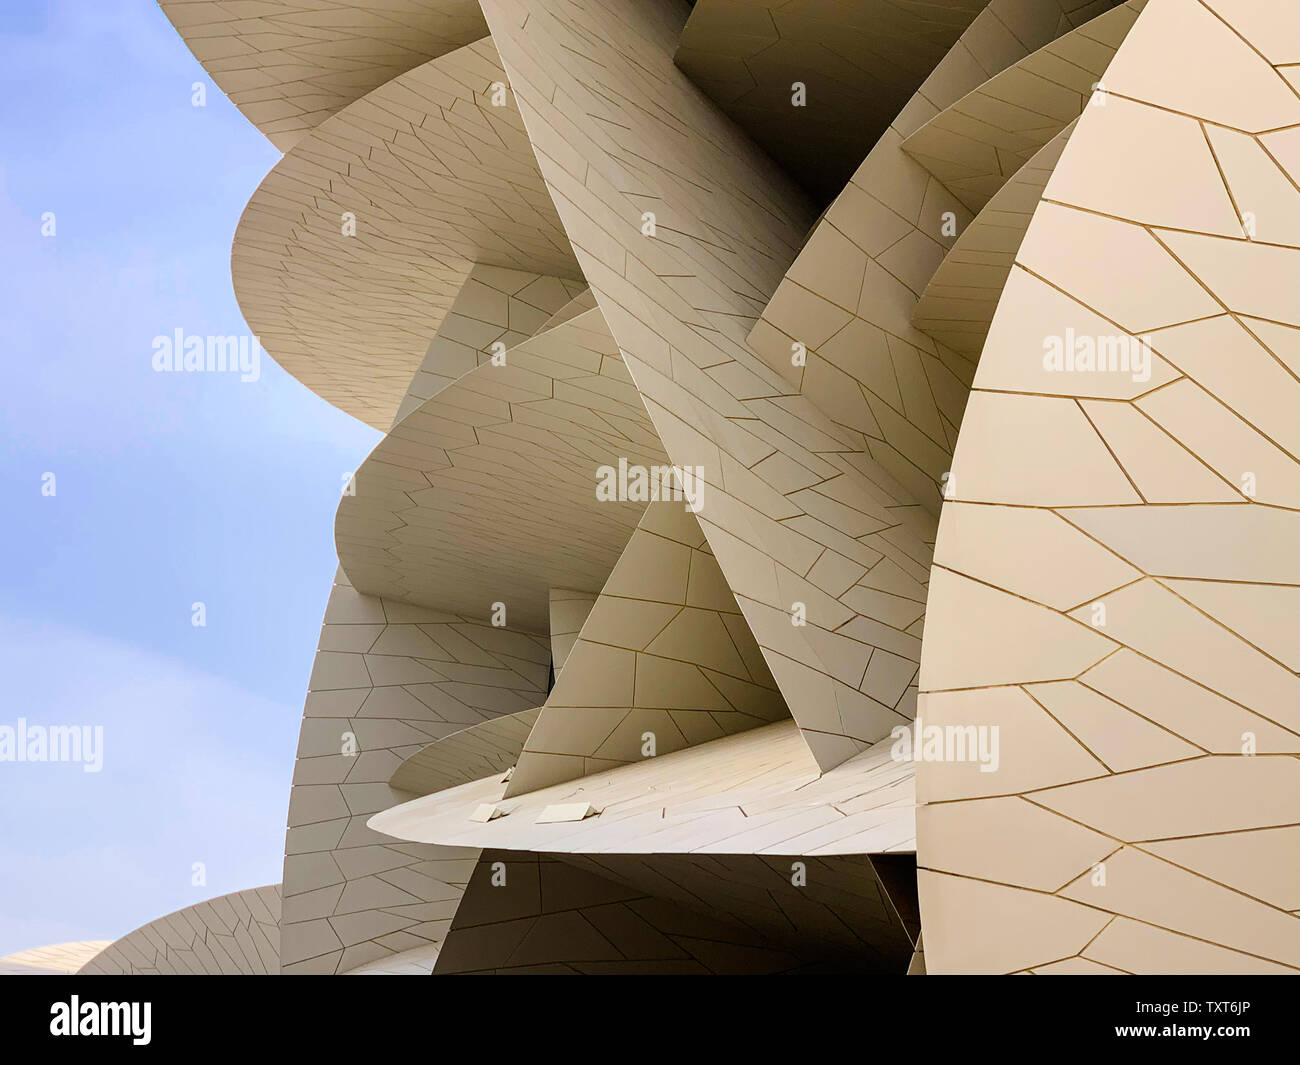 Part of the structure of the new National Museum of Doha in Qatar Stock Photo